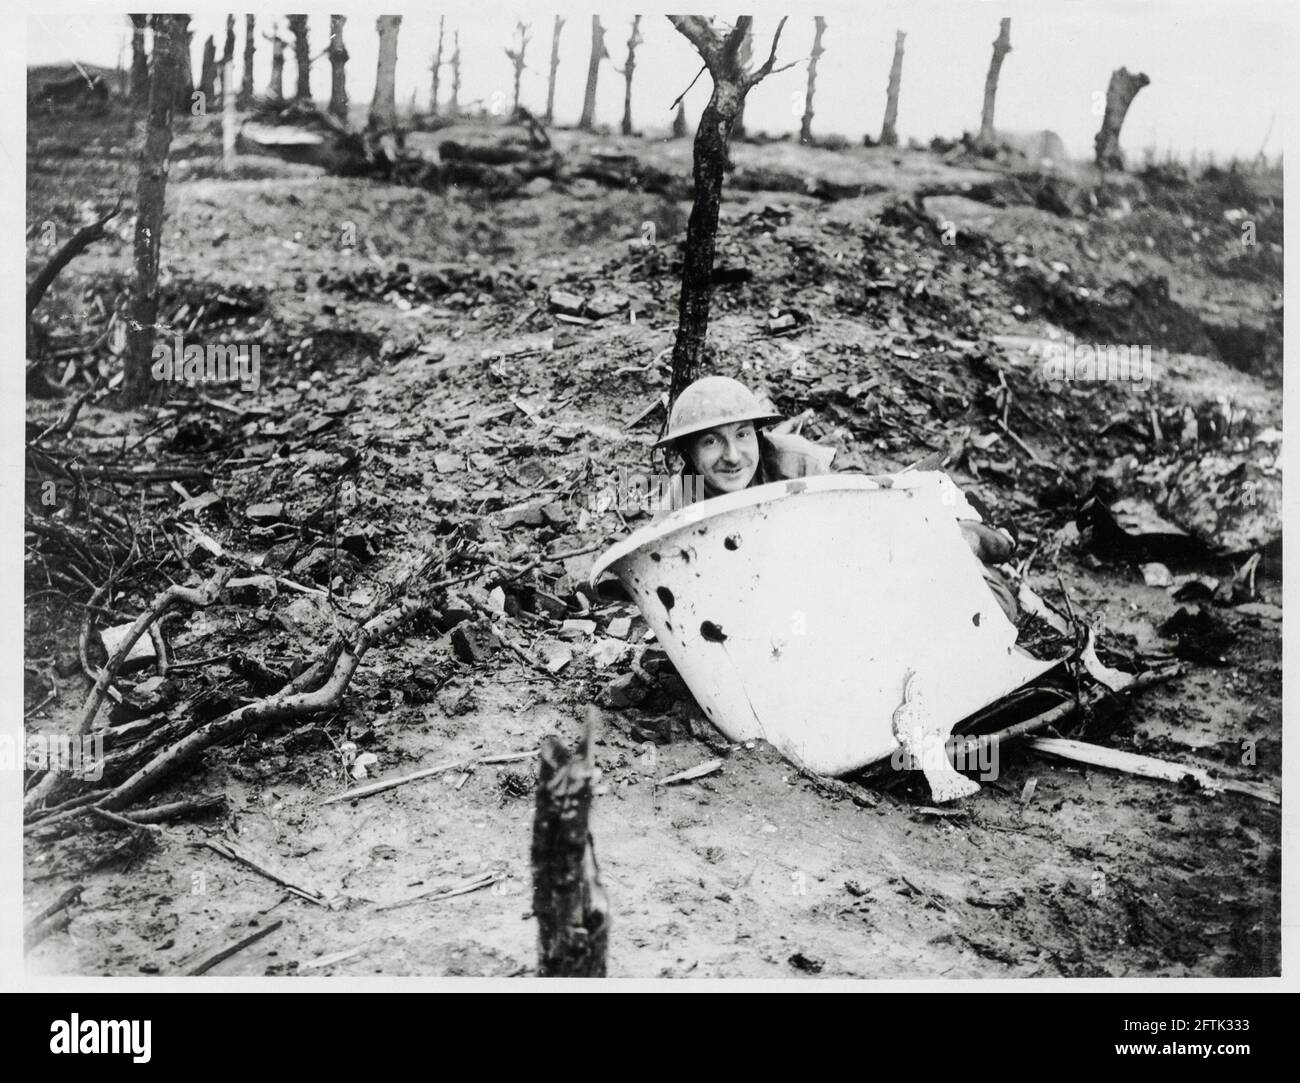 World War One, WWI, Western Front - A soldier in a German bath amidst desolation, France Stock Photo